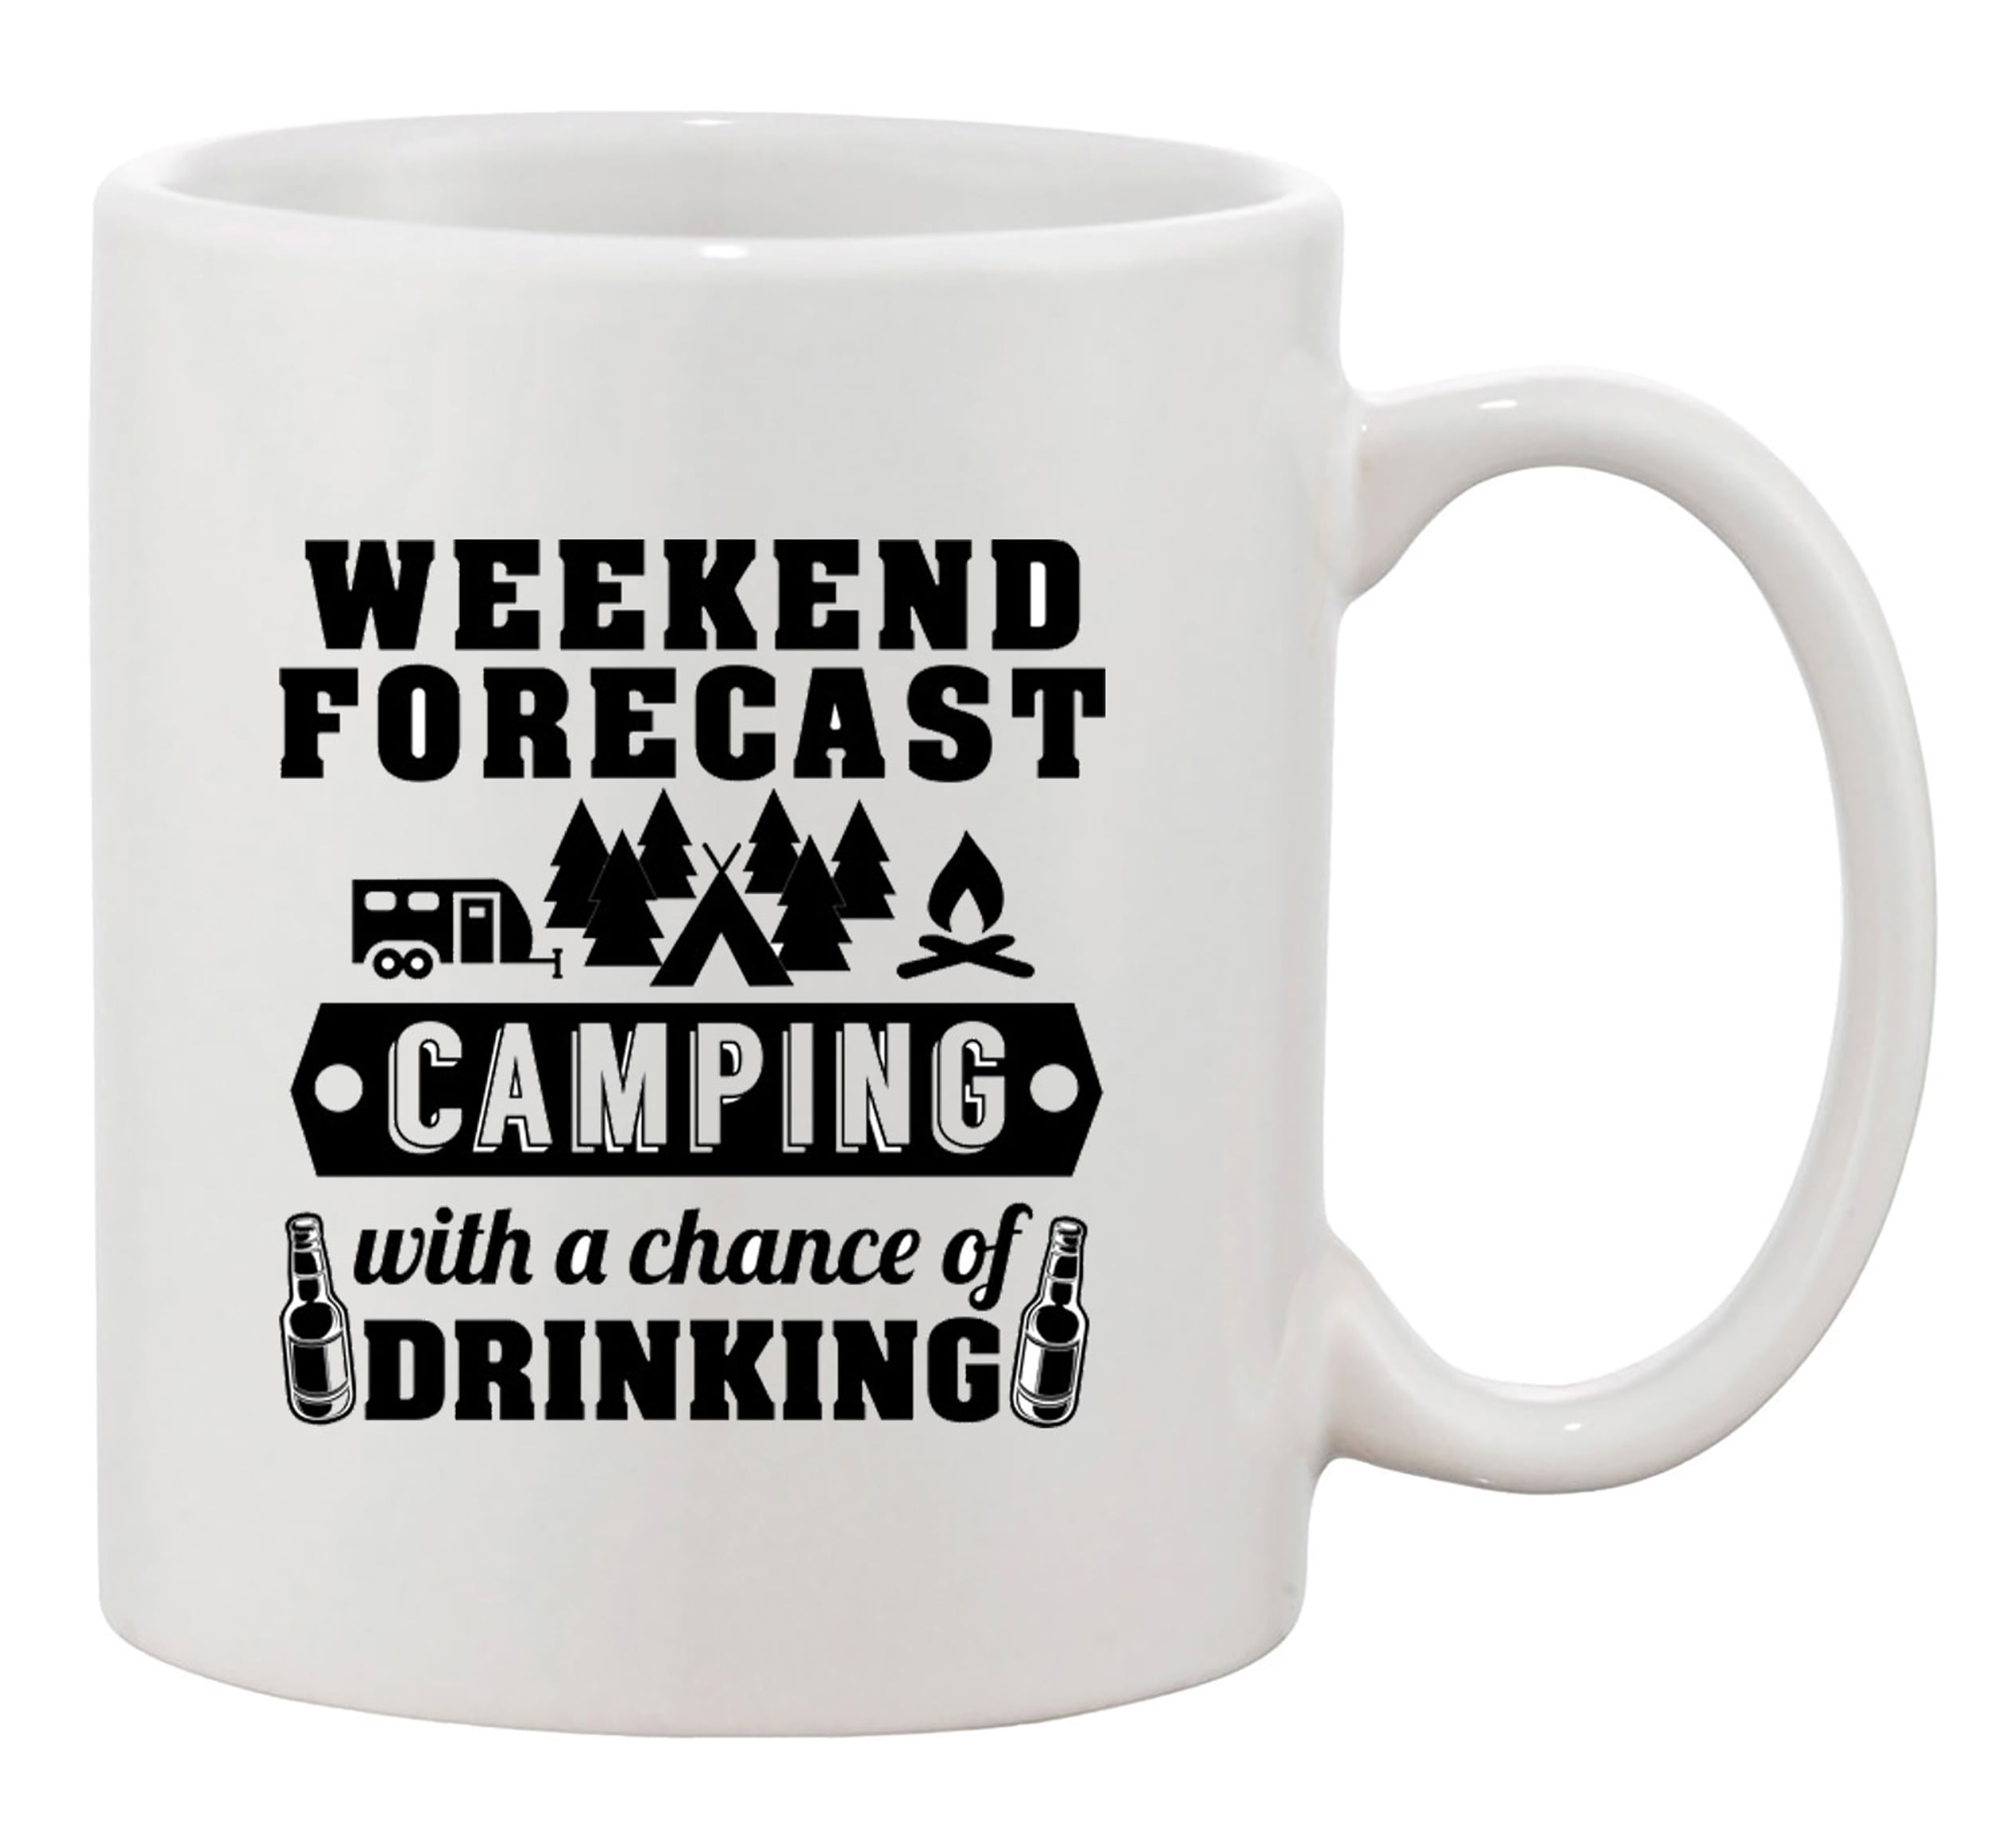 WEEKEND FORECAST CAMPING WITH A CHANCE OF DRINKING FUNNY GIFT Tea/Coffee Mug 